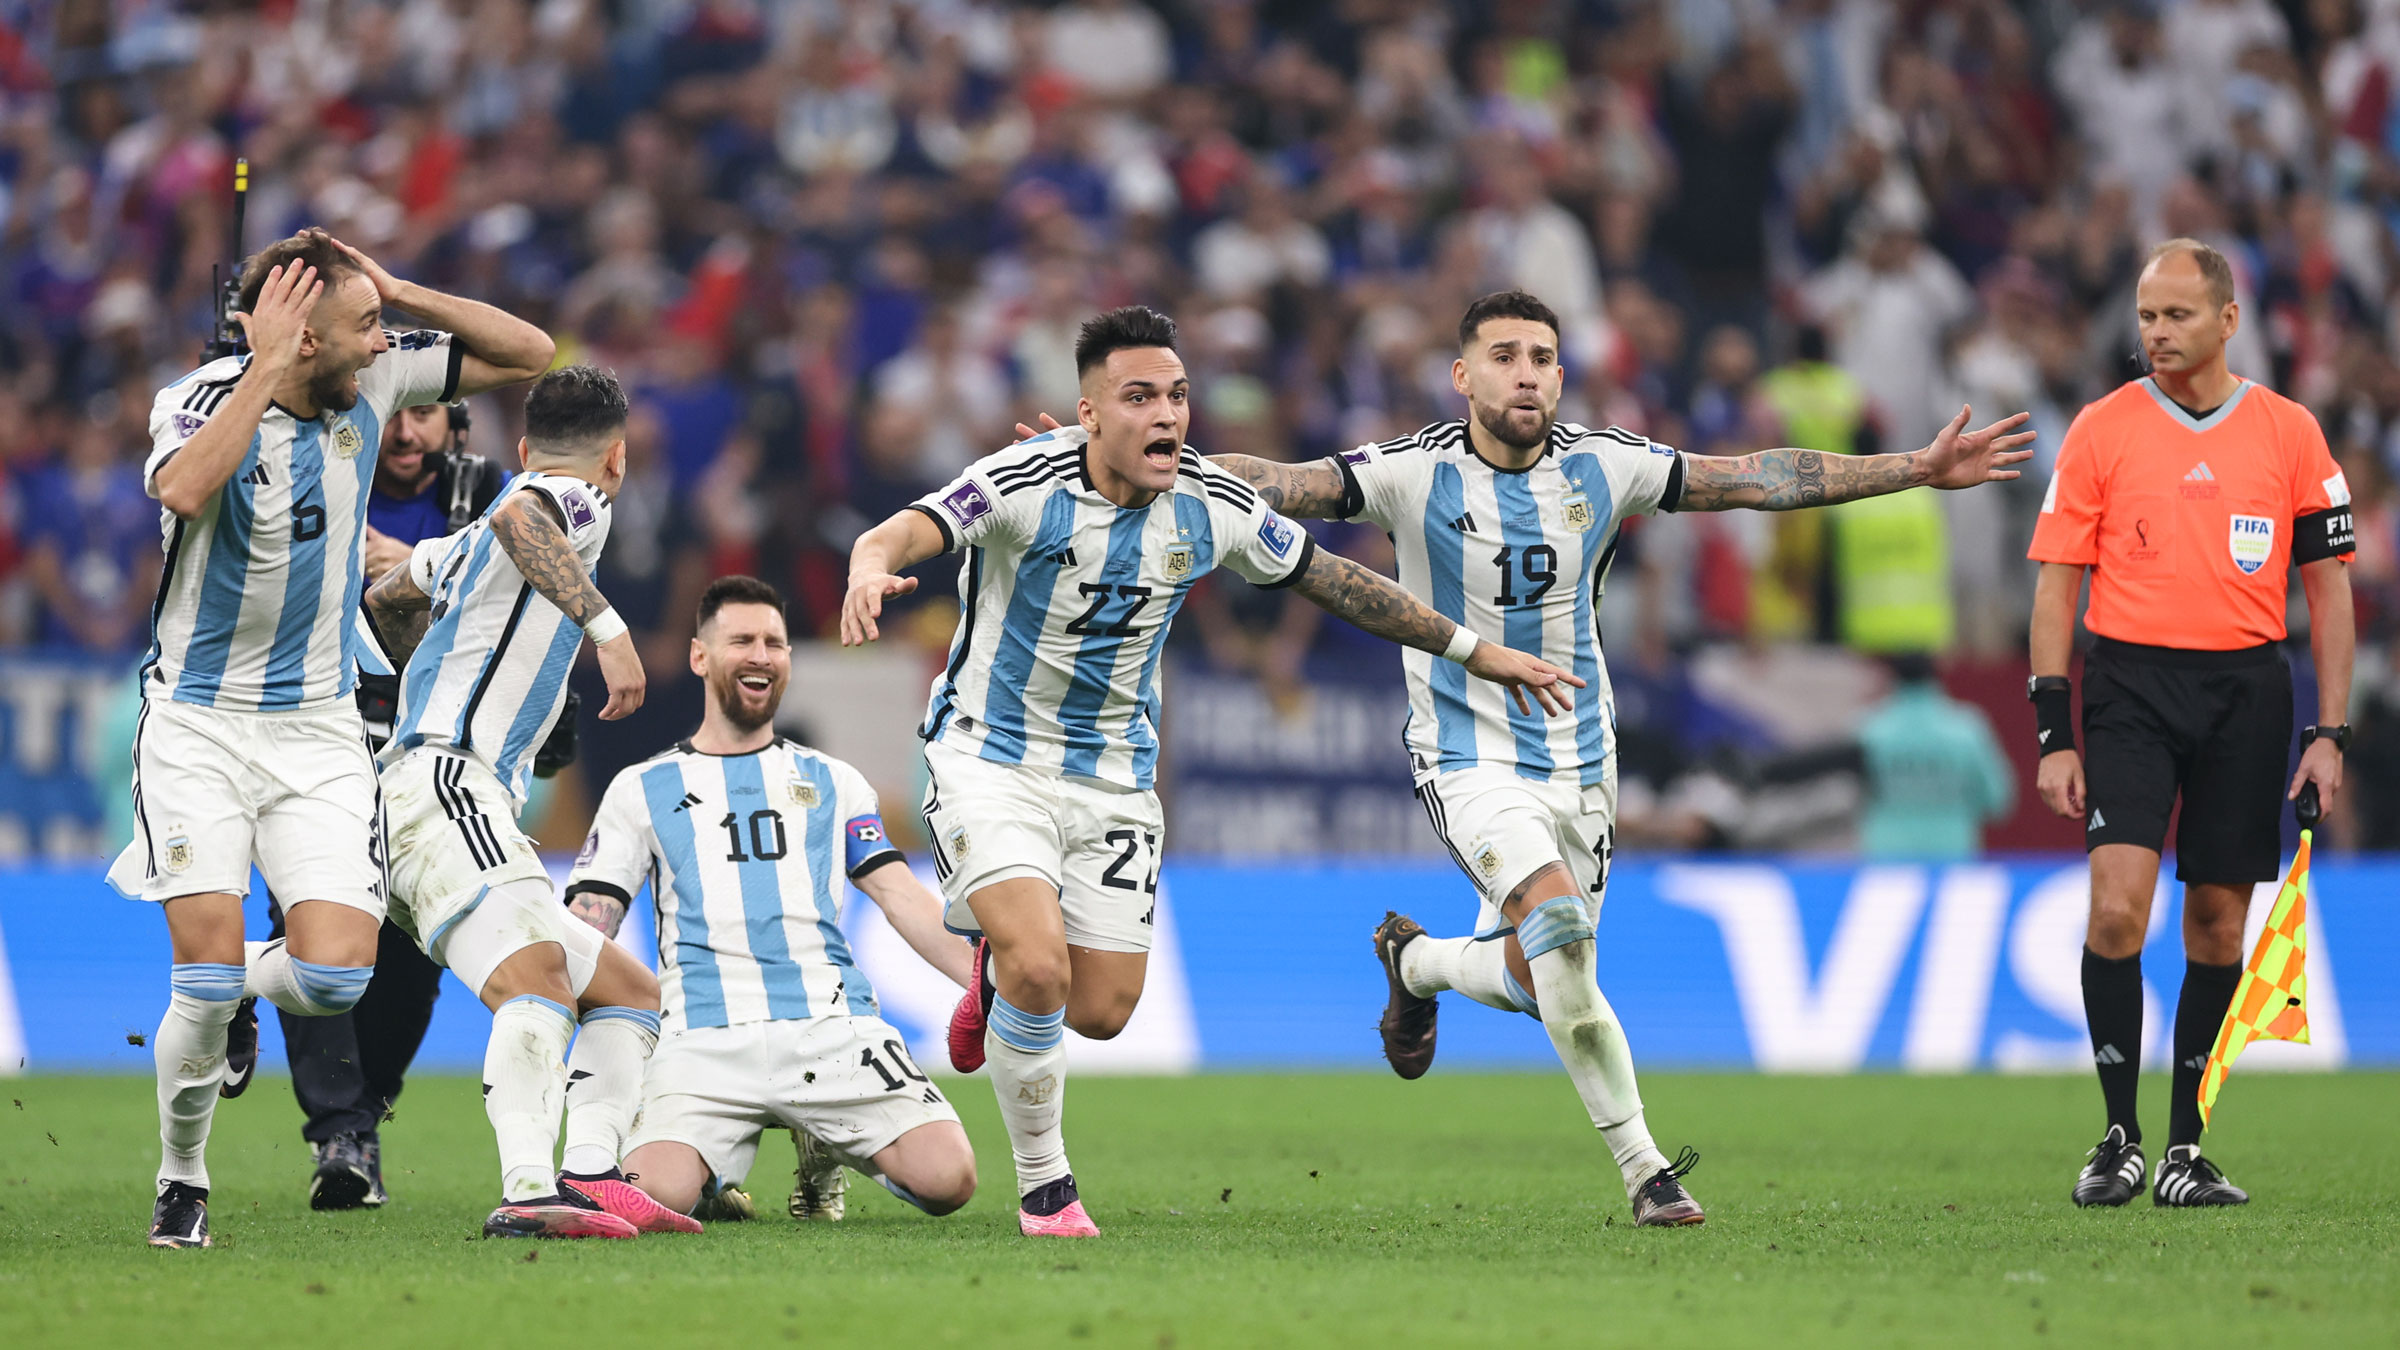 Lionel Messi-inspired Argentina wins World Cup after beating France in sensational final